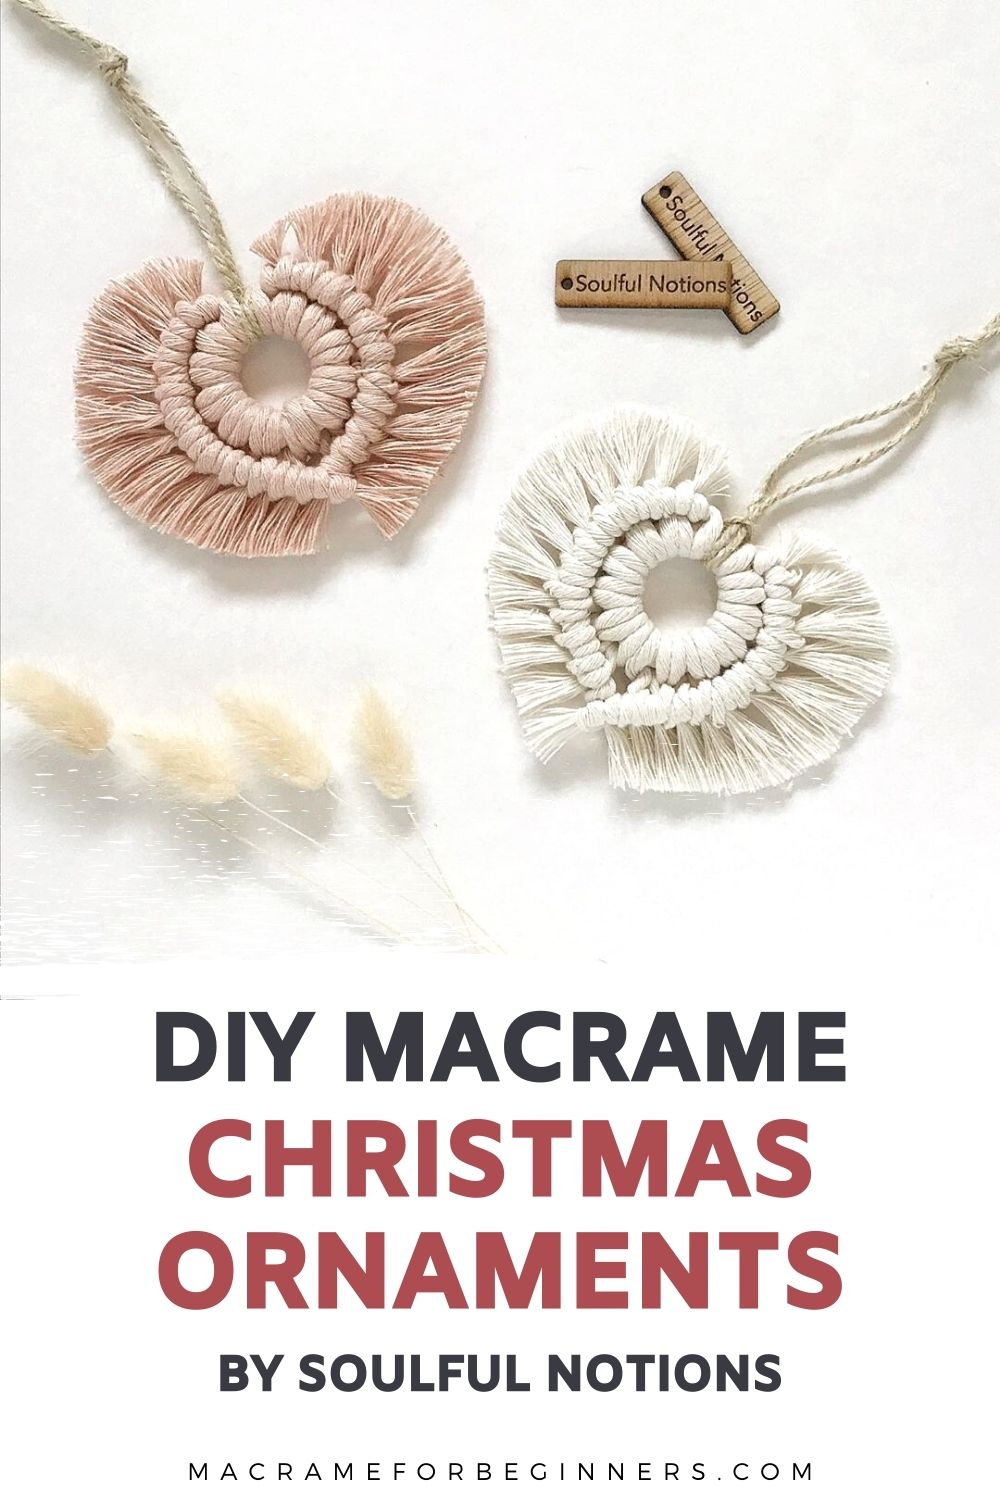 Make Your Own Gorgeous Macrame Christmas Decorations – Easy Video Tutorials by Soulful Notions 